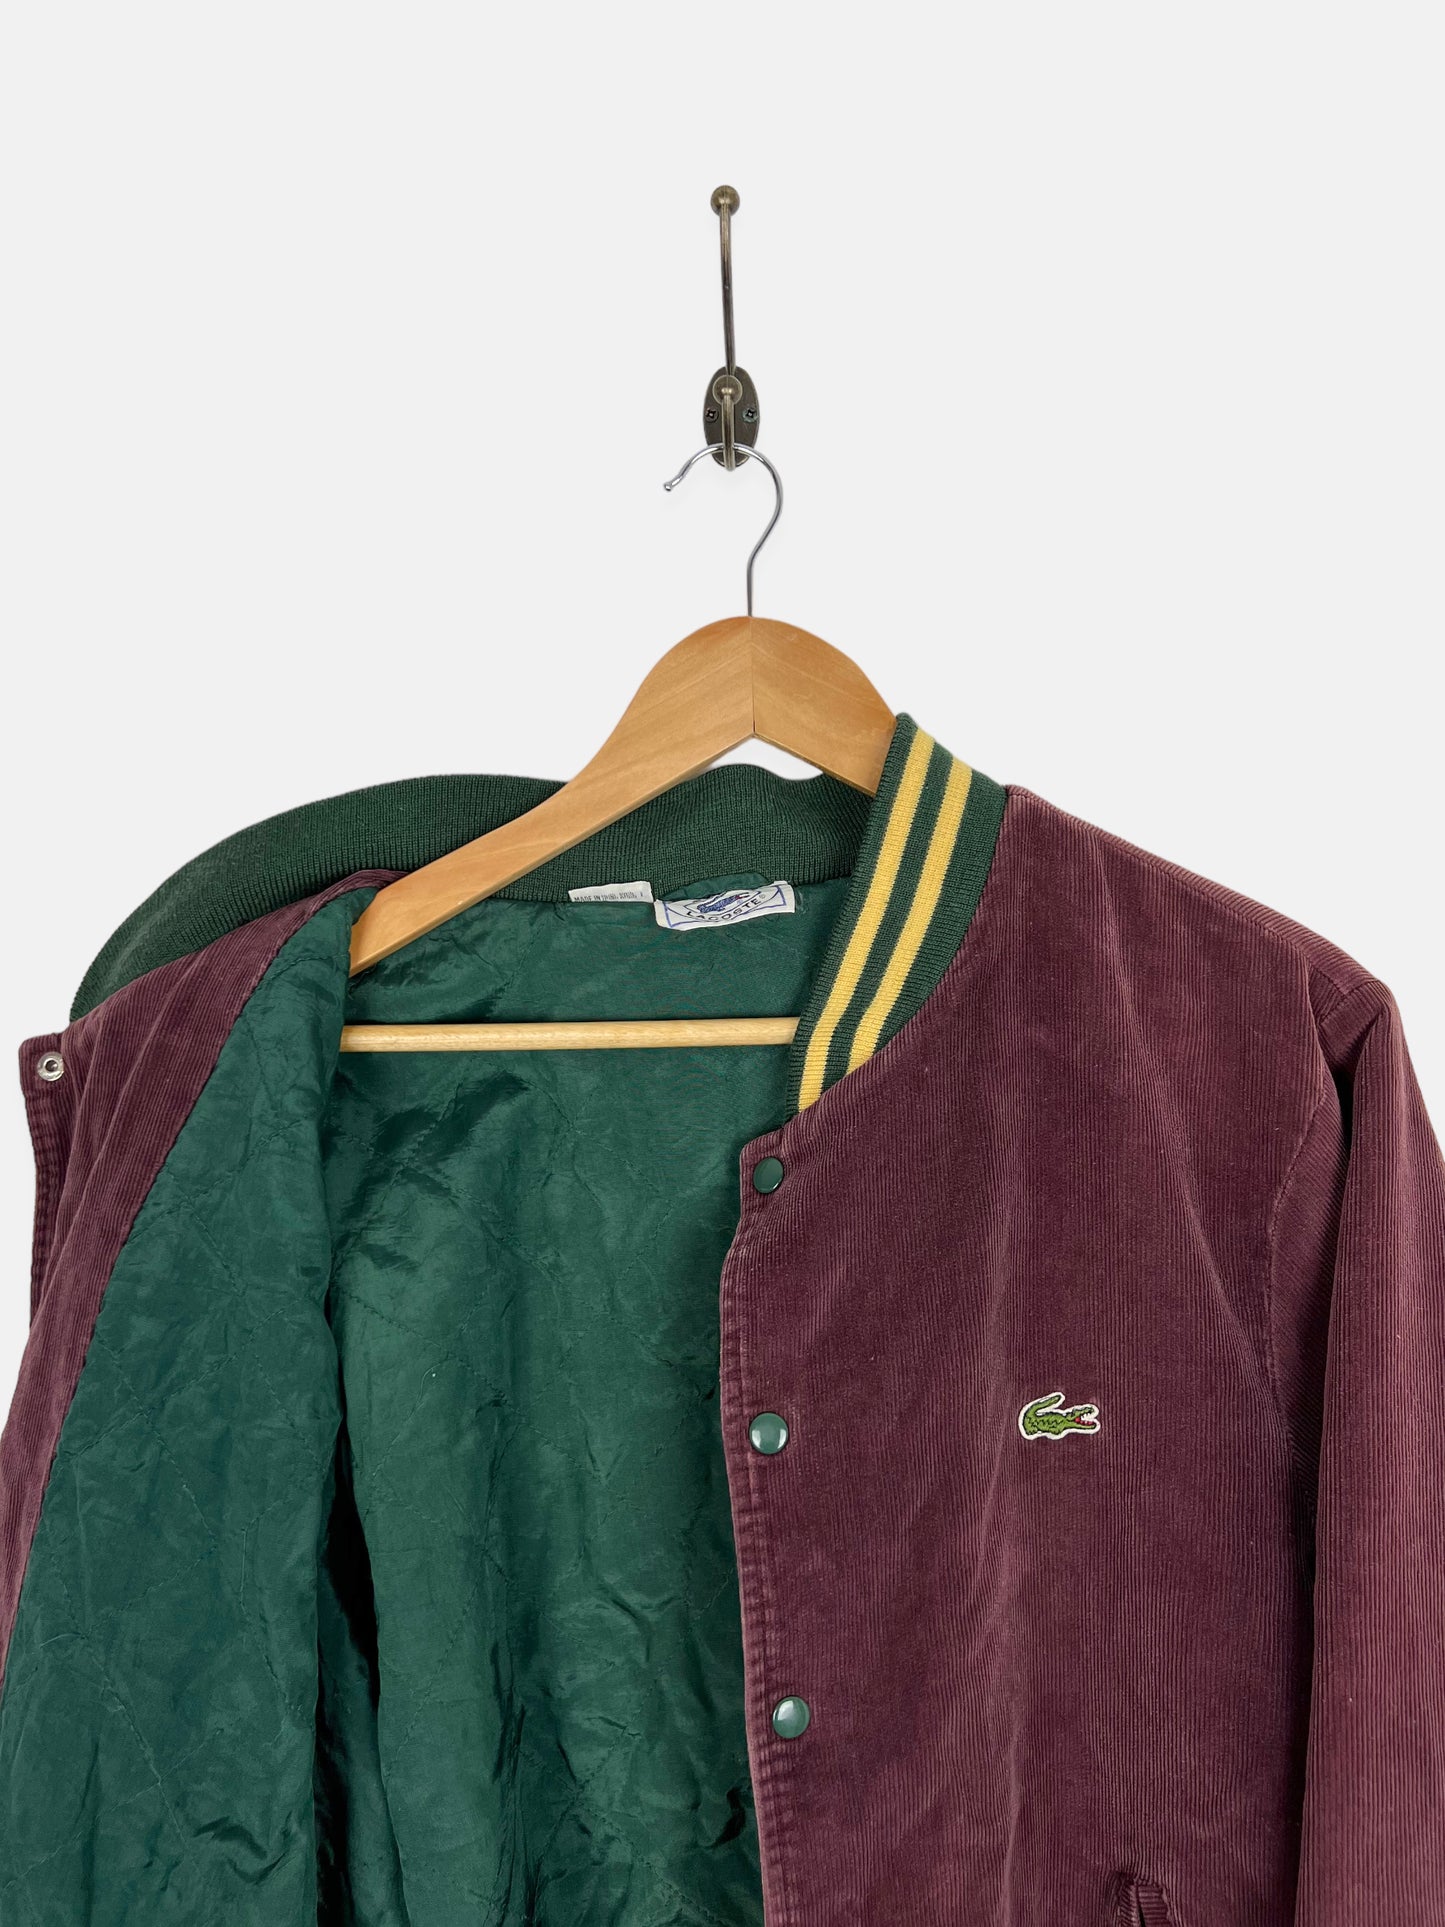 90's Lacoste Embroidered Corduroy Jacket Size 14